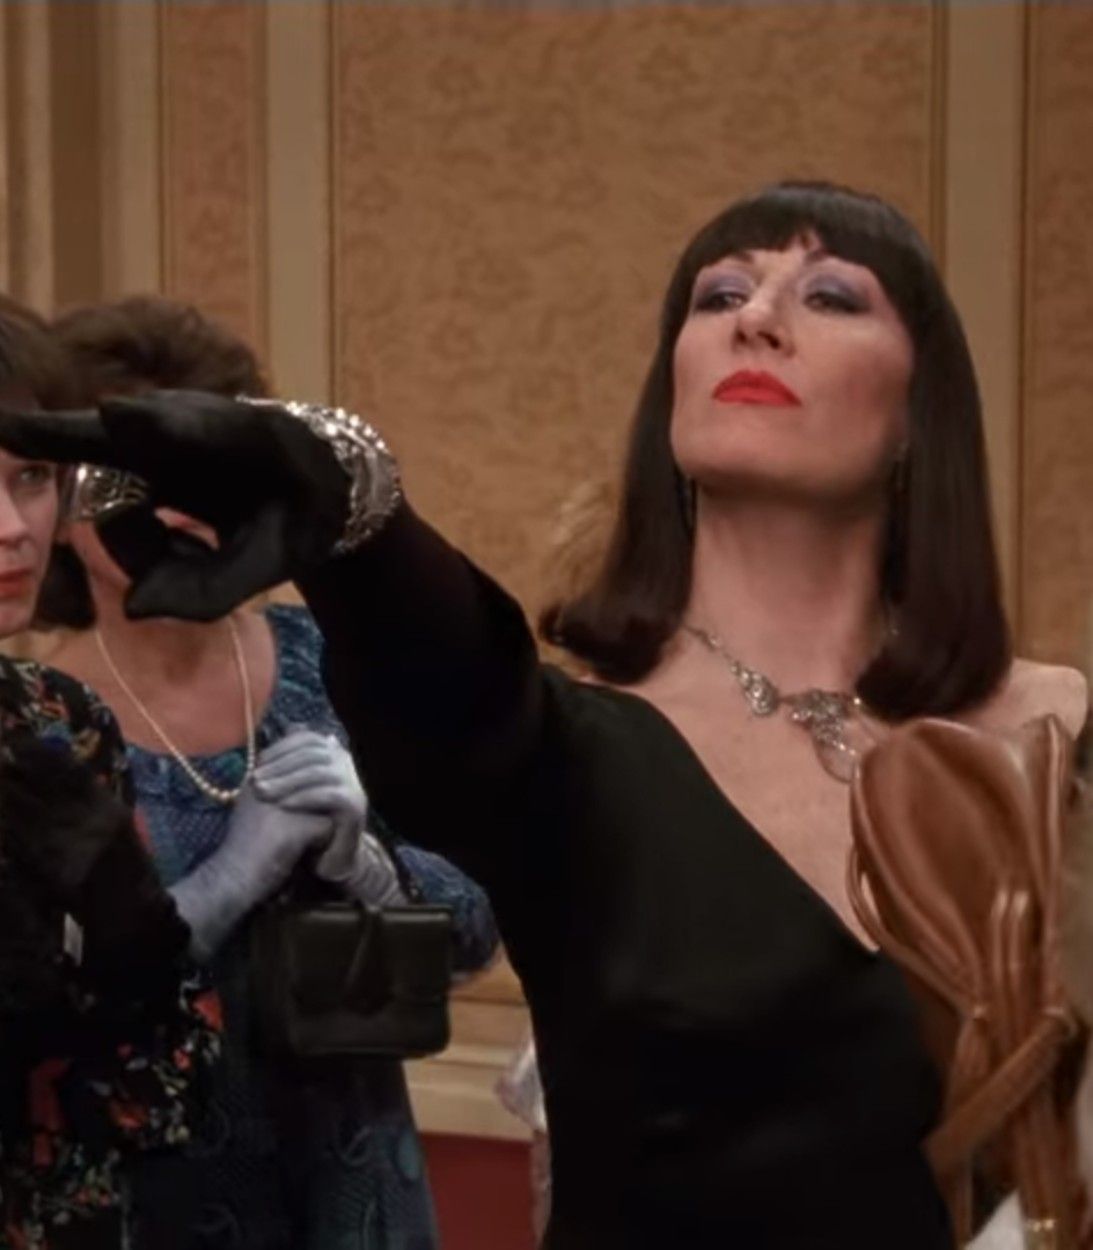 The Grand High Witch Anjelica Huston The Witches